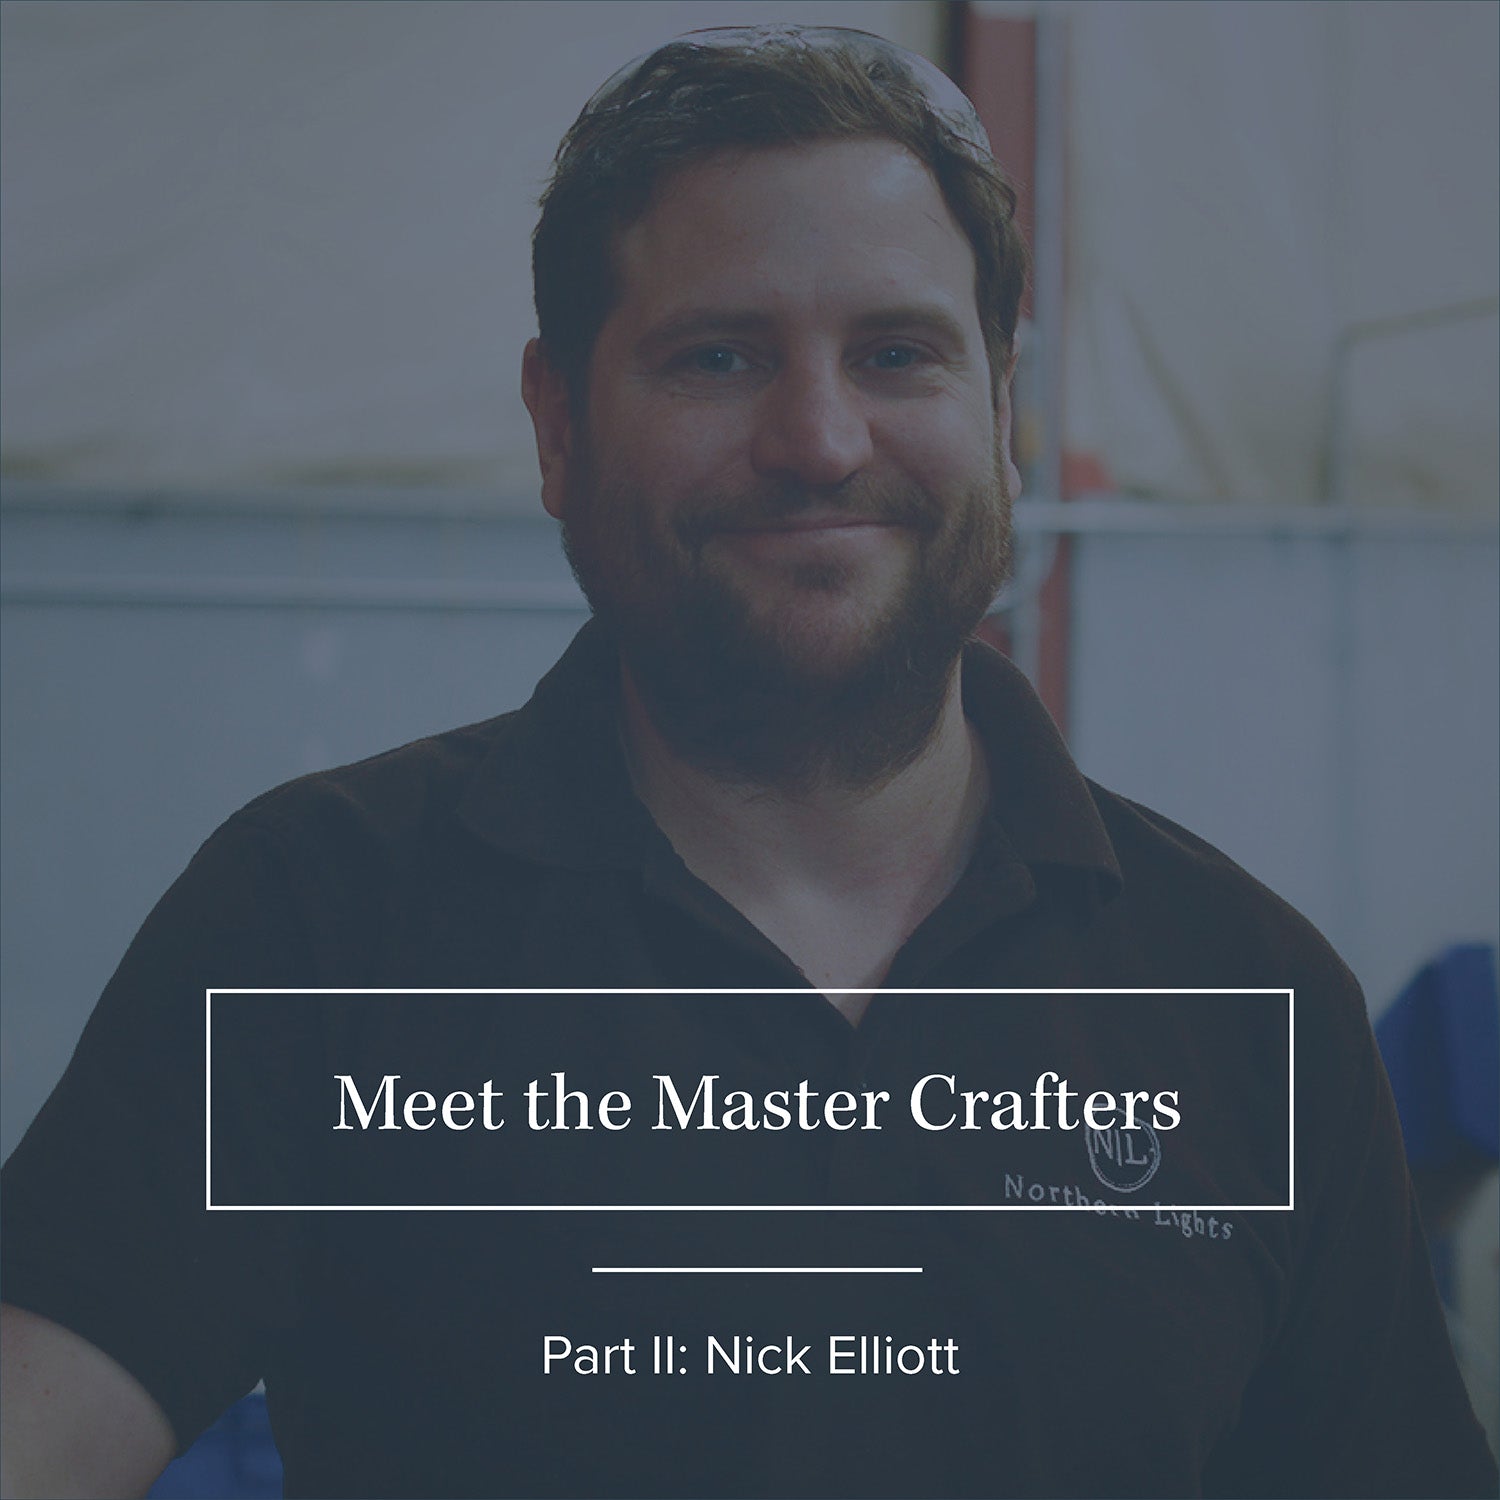 Meet the Master Crafters: Part II